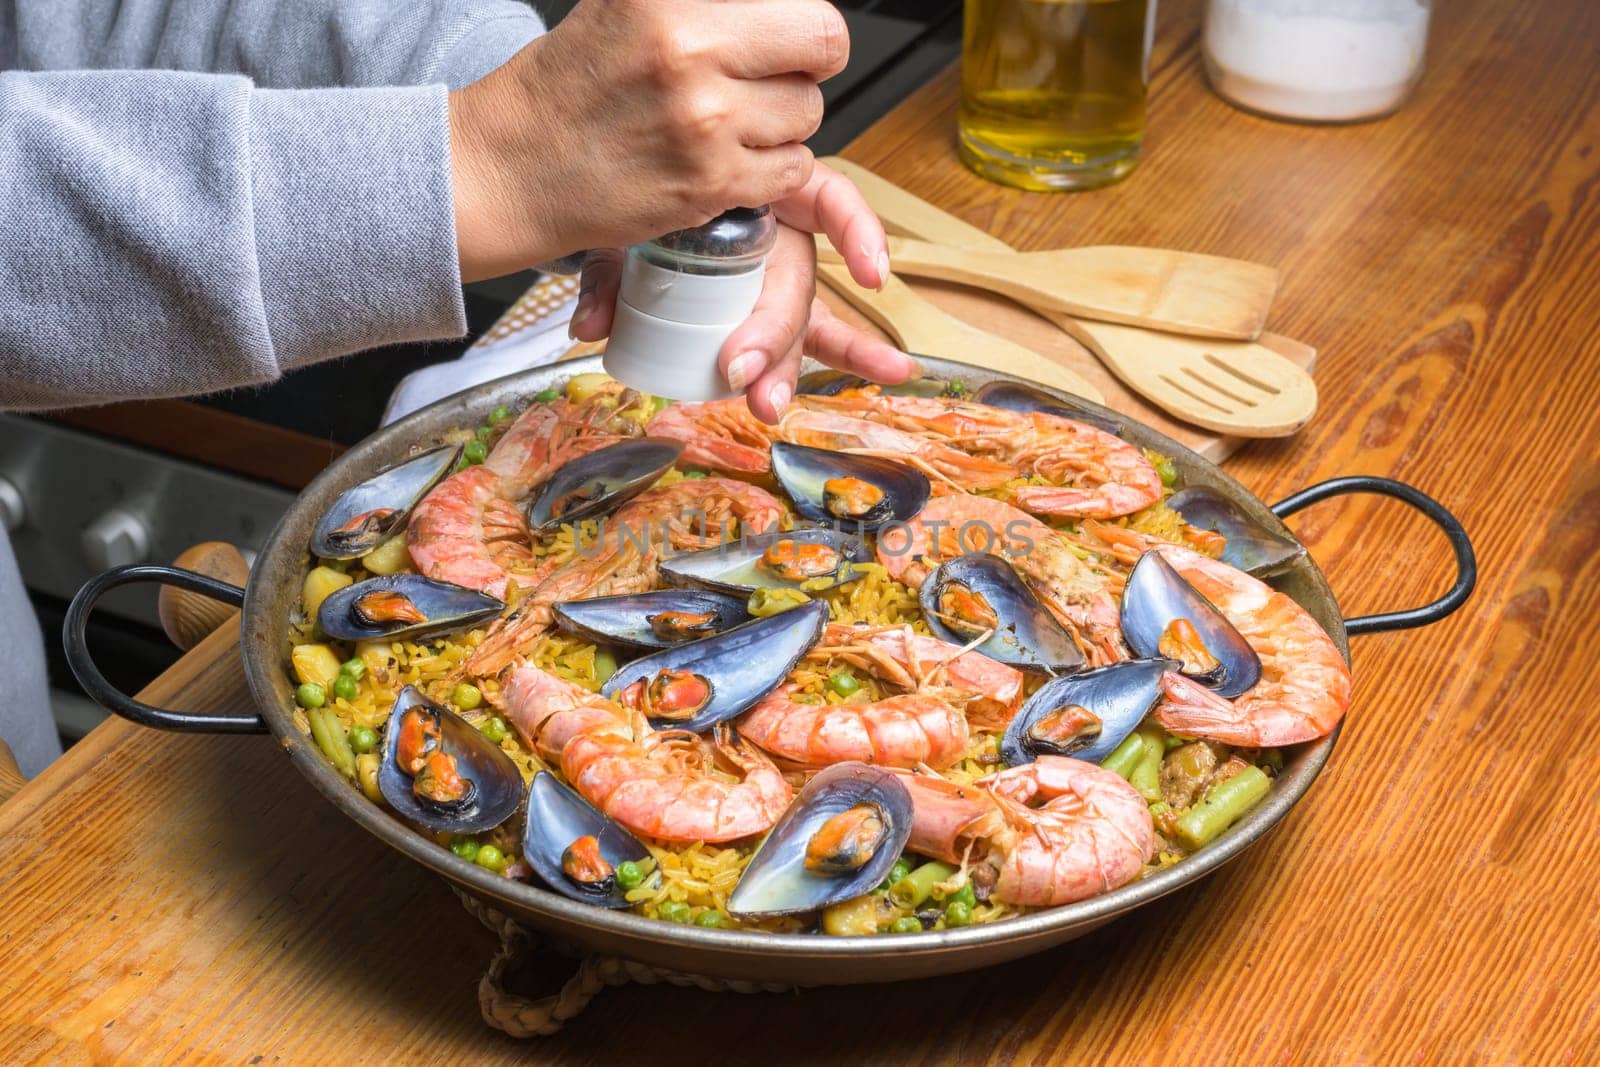 Seasoning a seafood paella with salt, a step in the cooking process of this flavorful Spanish meal, typical Spanish cuisine, Majorca, Balearic Islands, Spain,